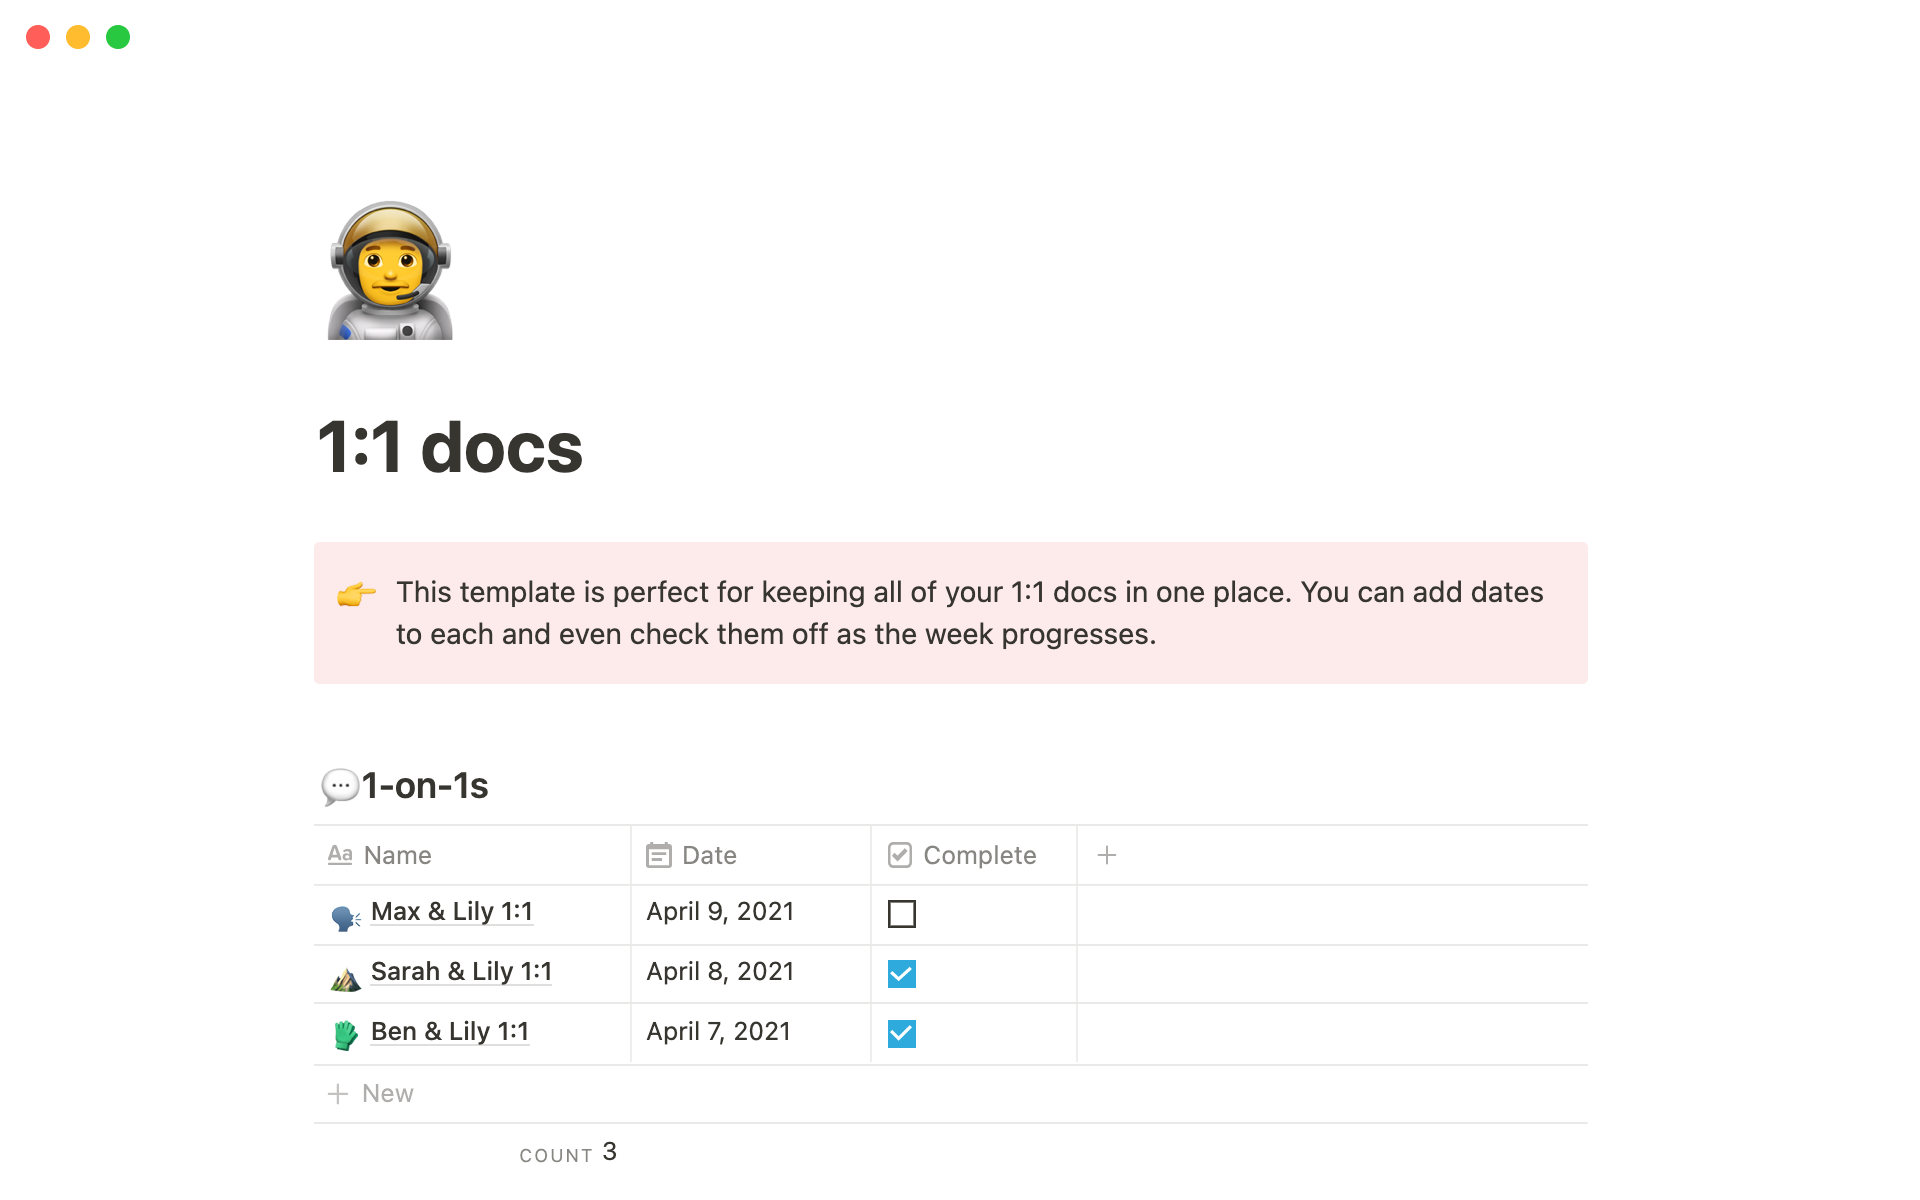 As a manager, you can use this template to organize all of your running 1:1 docs with your direct reports.